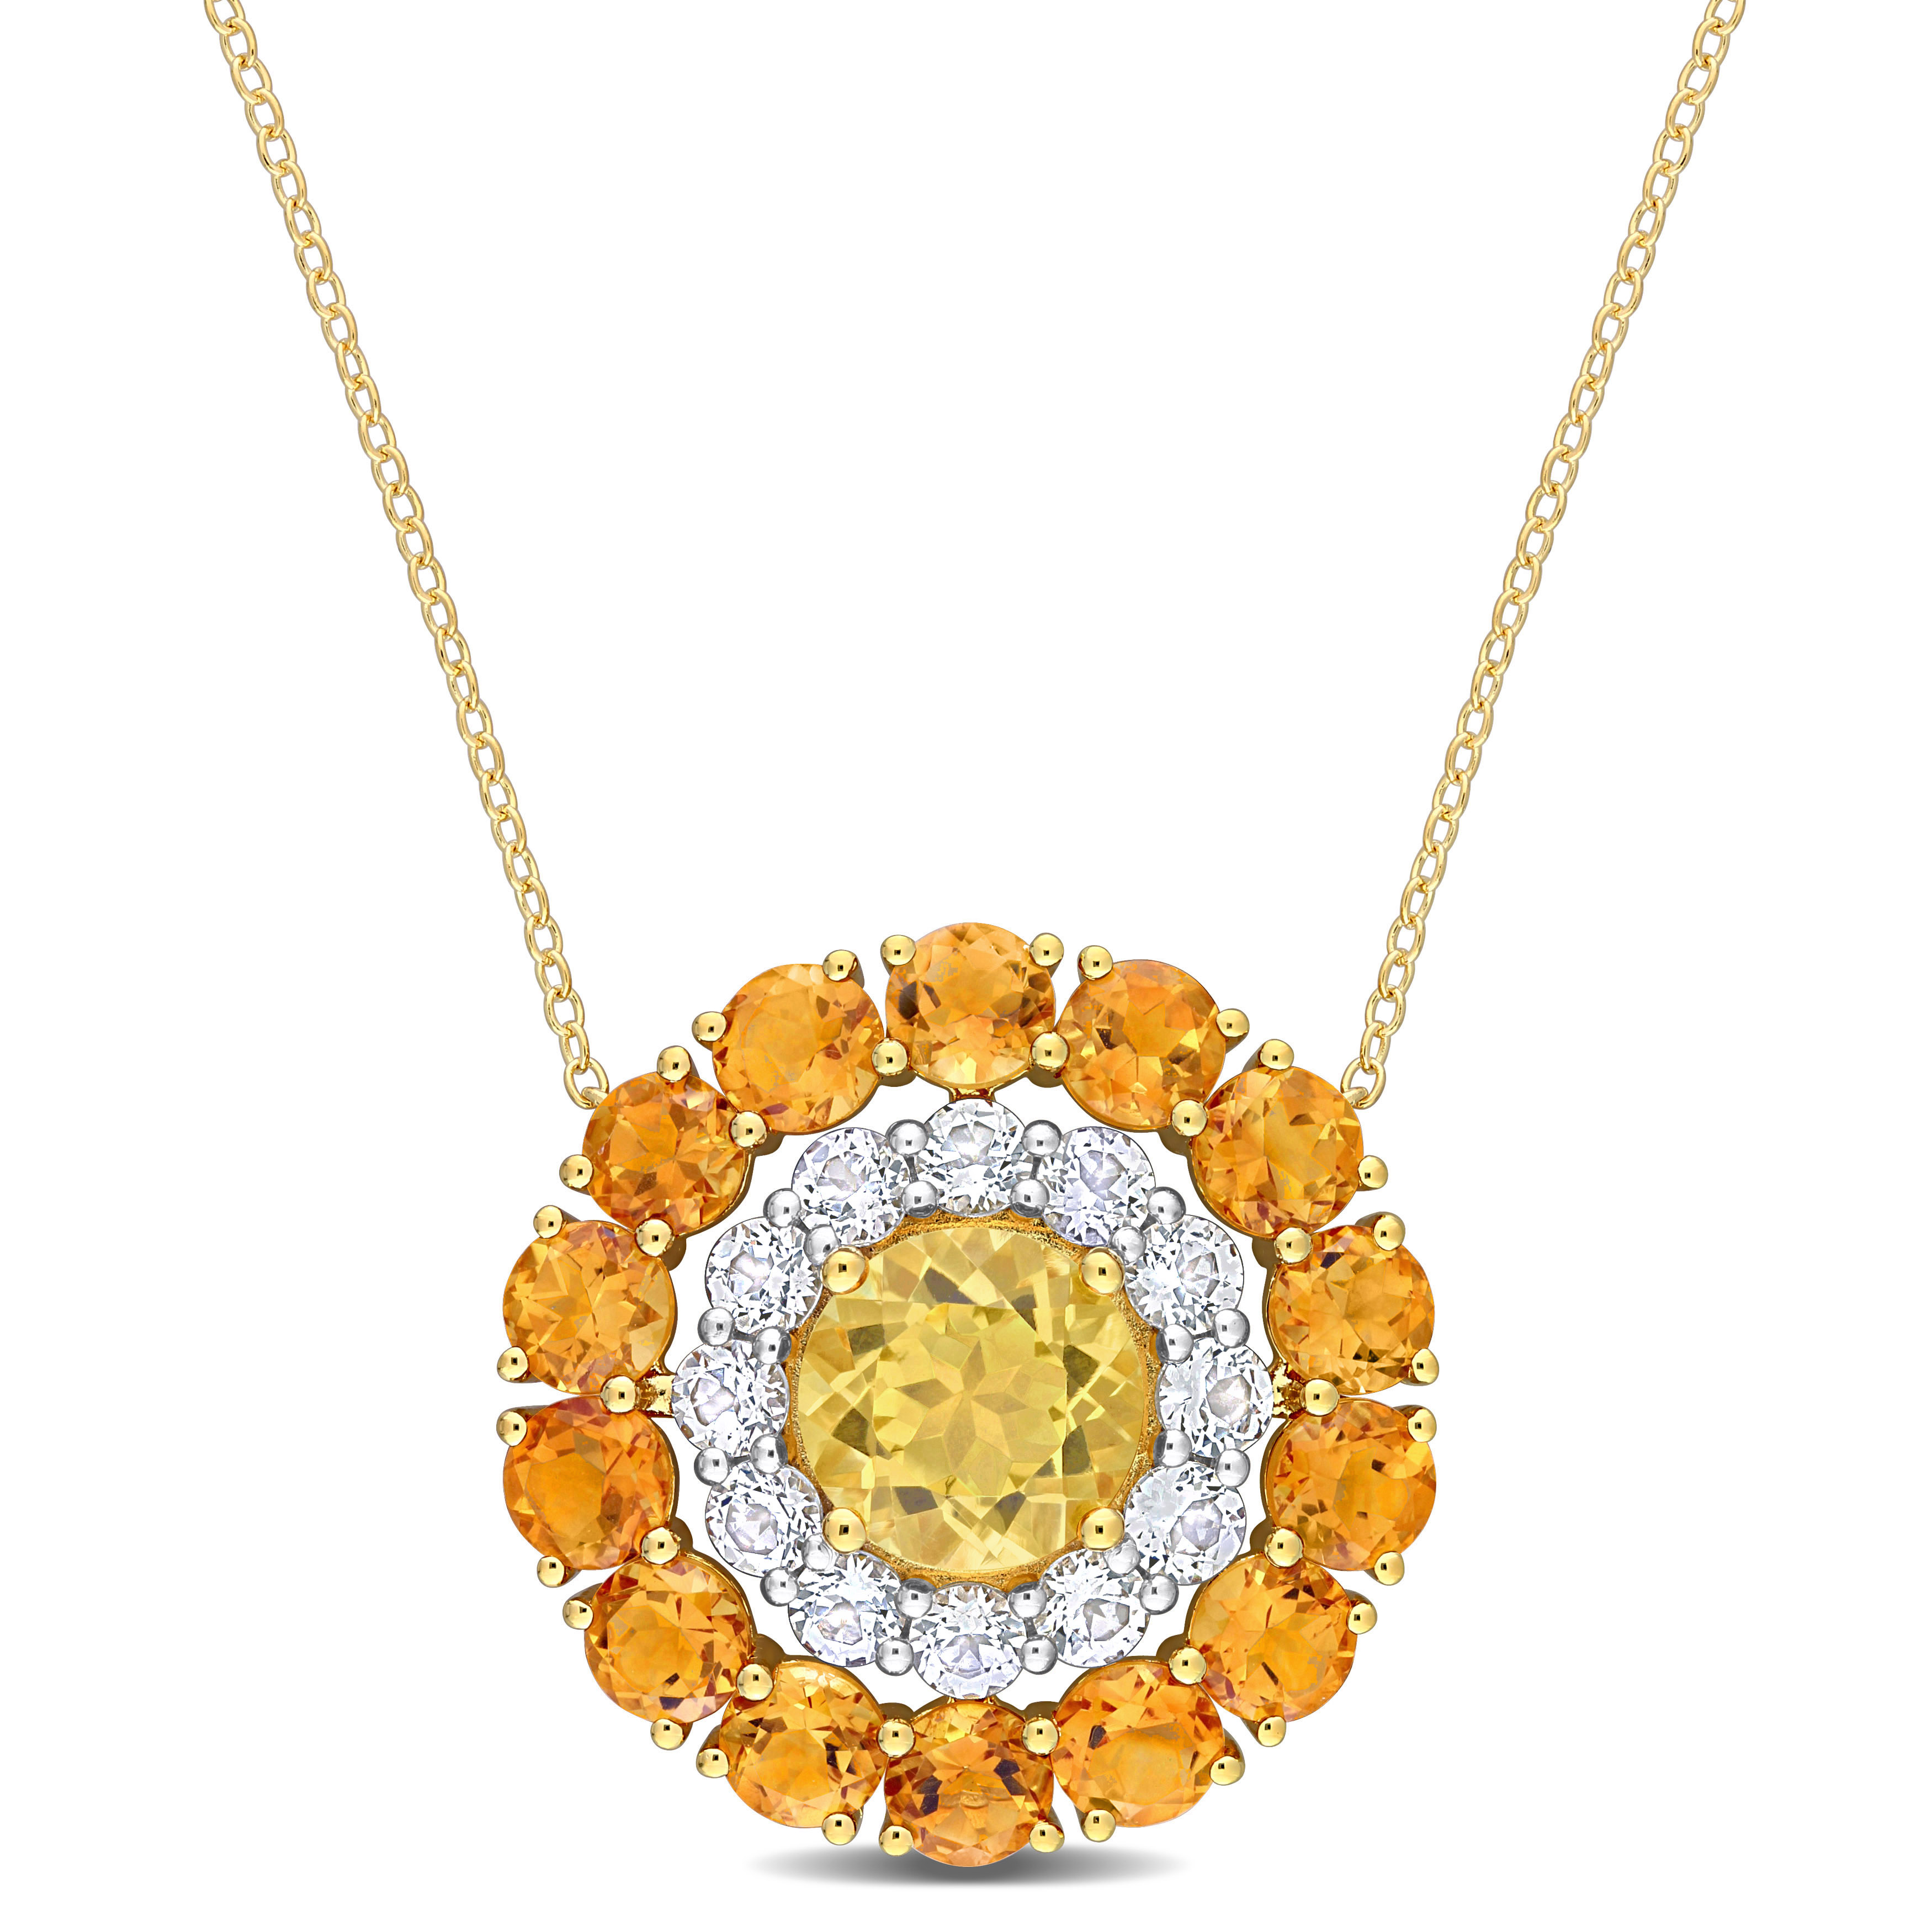 11 2/5 CT TGW Citrine, Madeira Citrine and White Topaz Double Halo Circle Pendant with Chain in 18k Yellow Gold Plated Sterling Silver - 18 in.